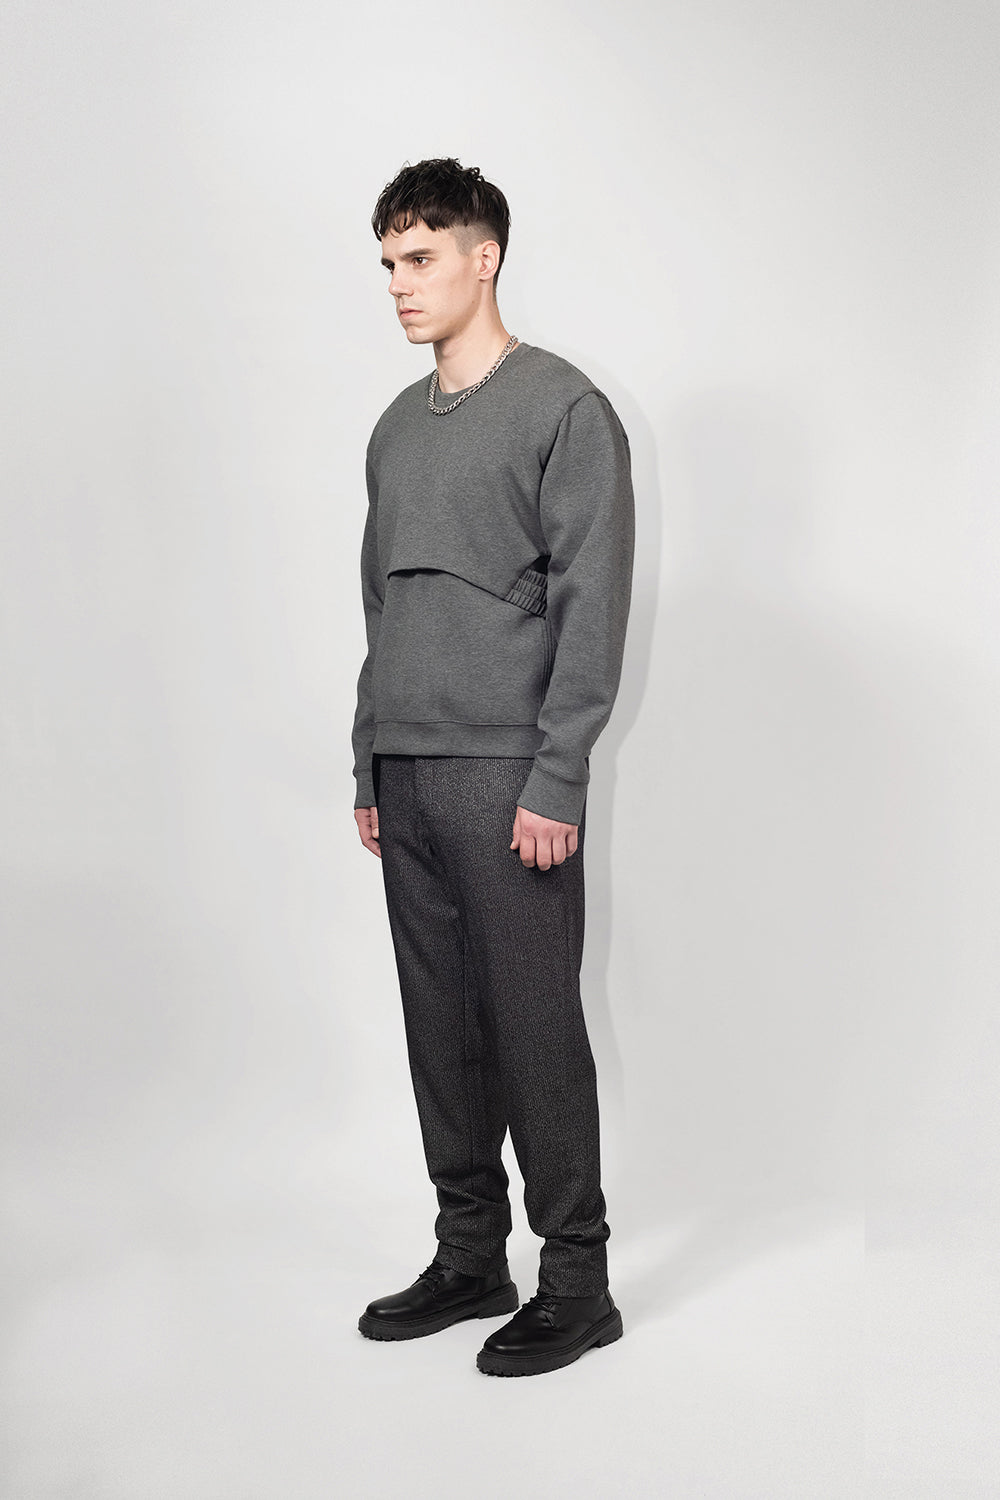 SEANNUNG - MEN - Double-Layered Oversized Top 雙層剪裁大學T